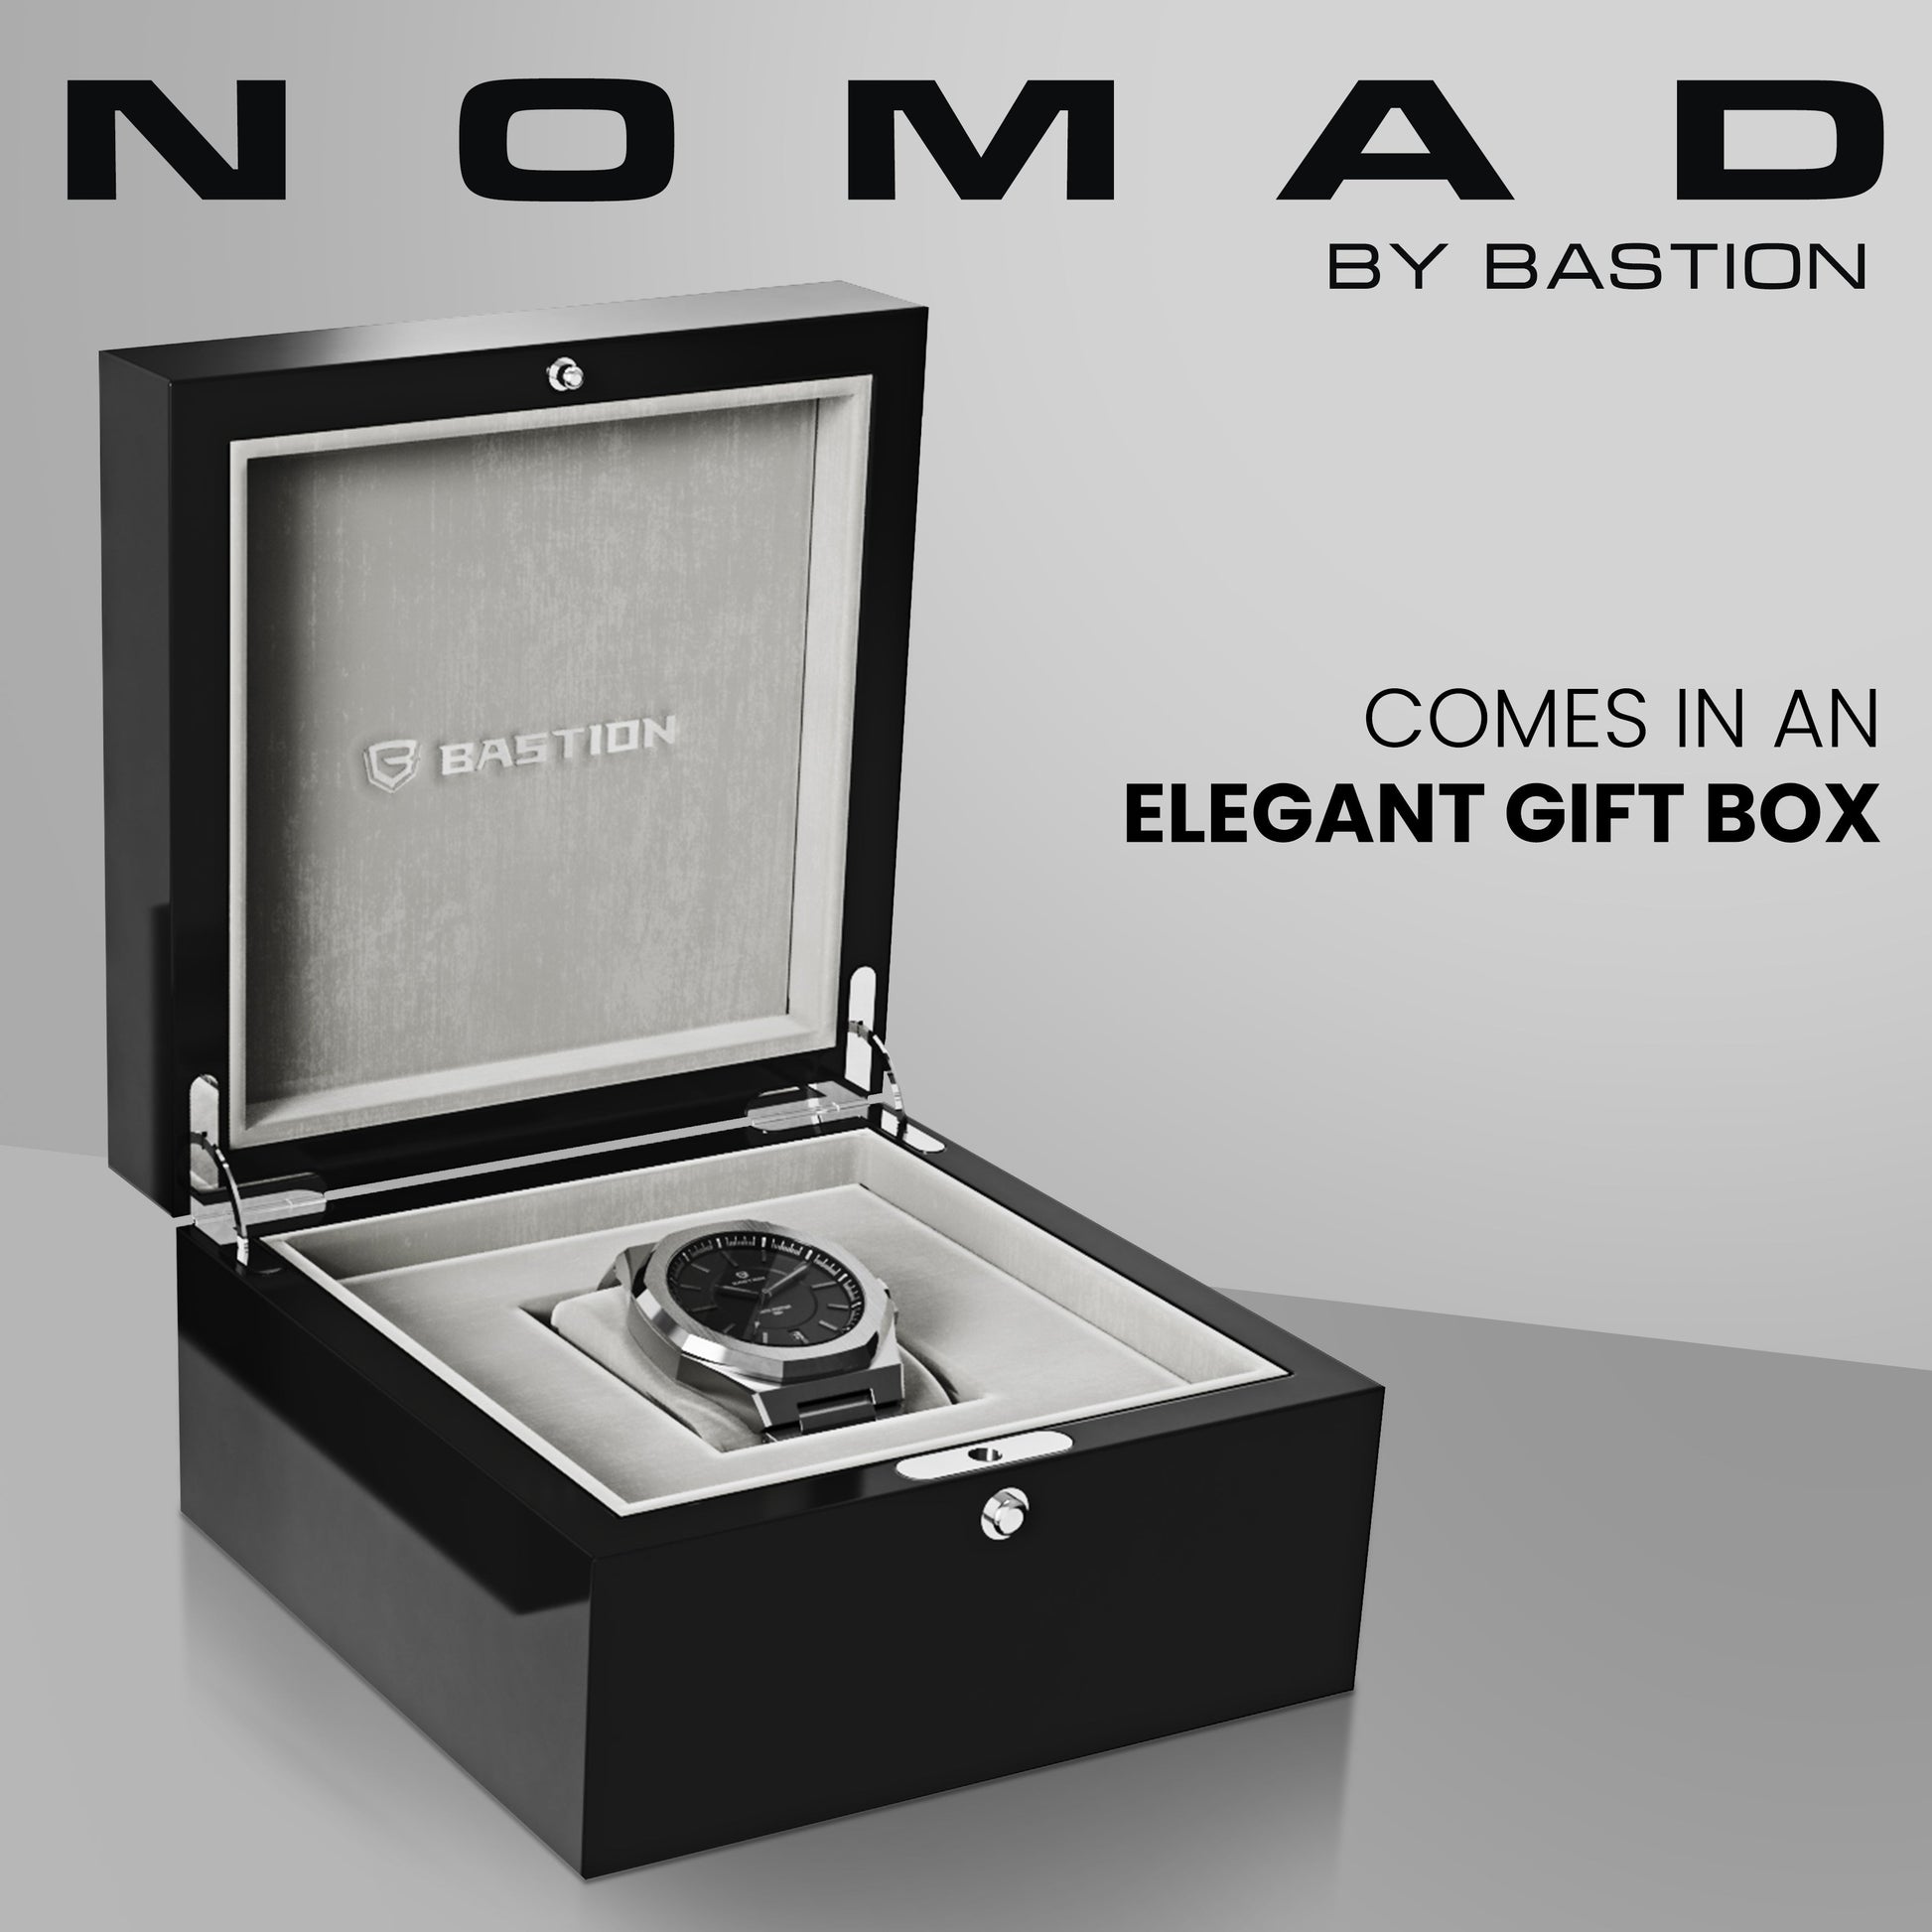 NOMAD - STAINLESS STEEL AUTOMATIC 42MM WATCH, WATERPROOF 10ATM (100m) - Bastion Bolt Action Pen